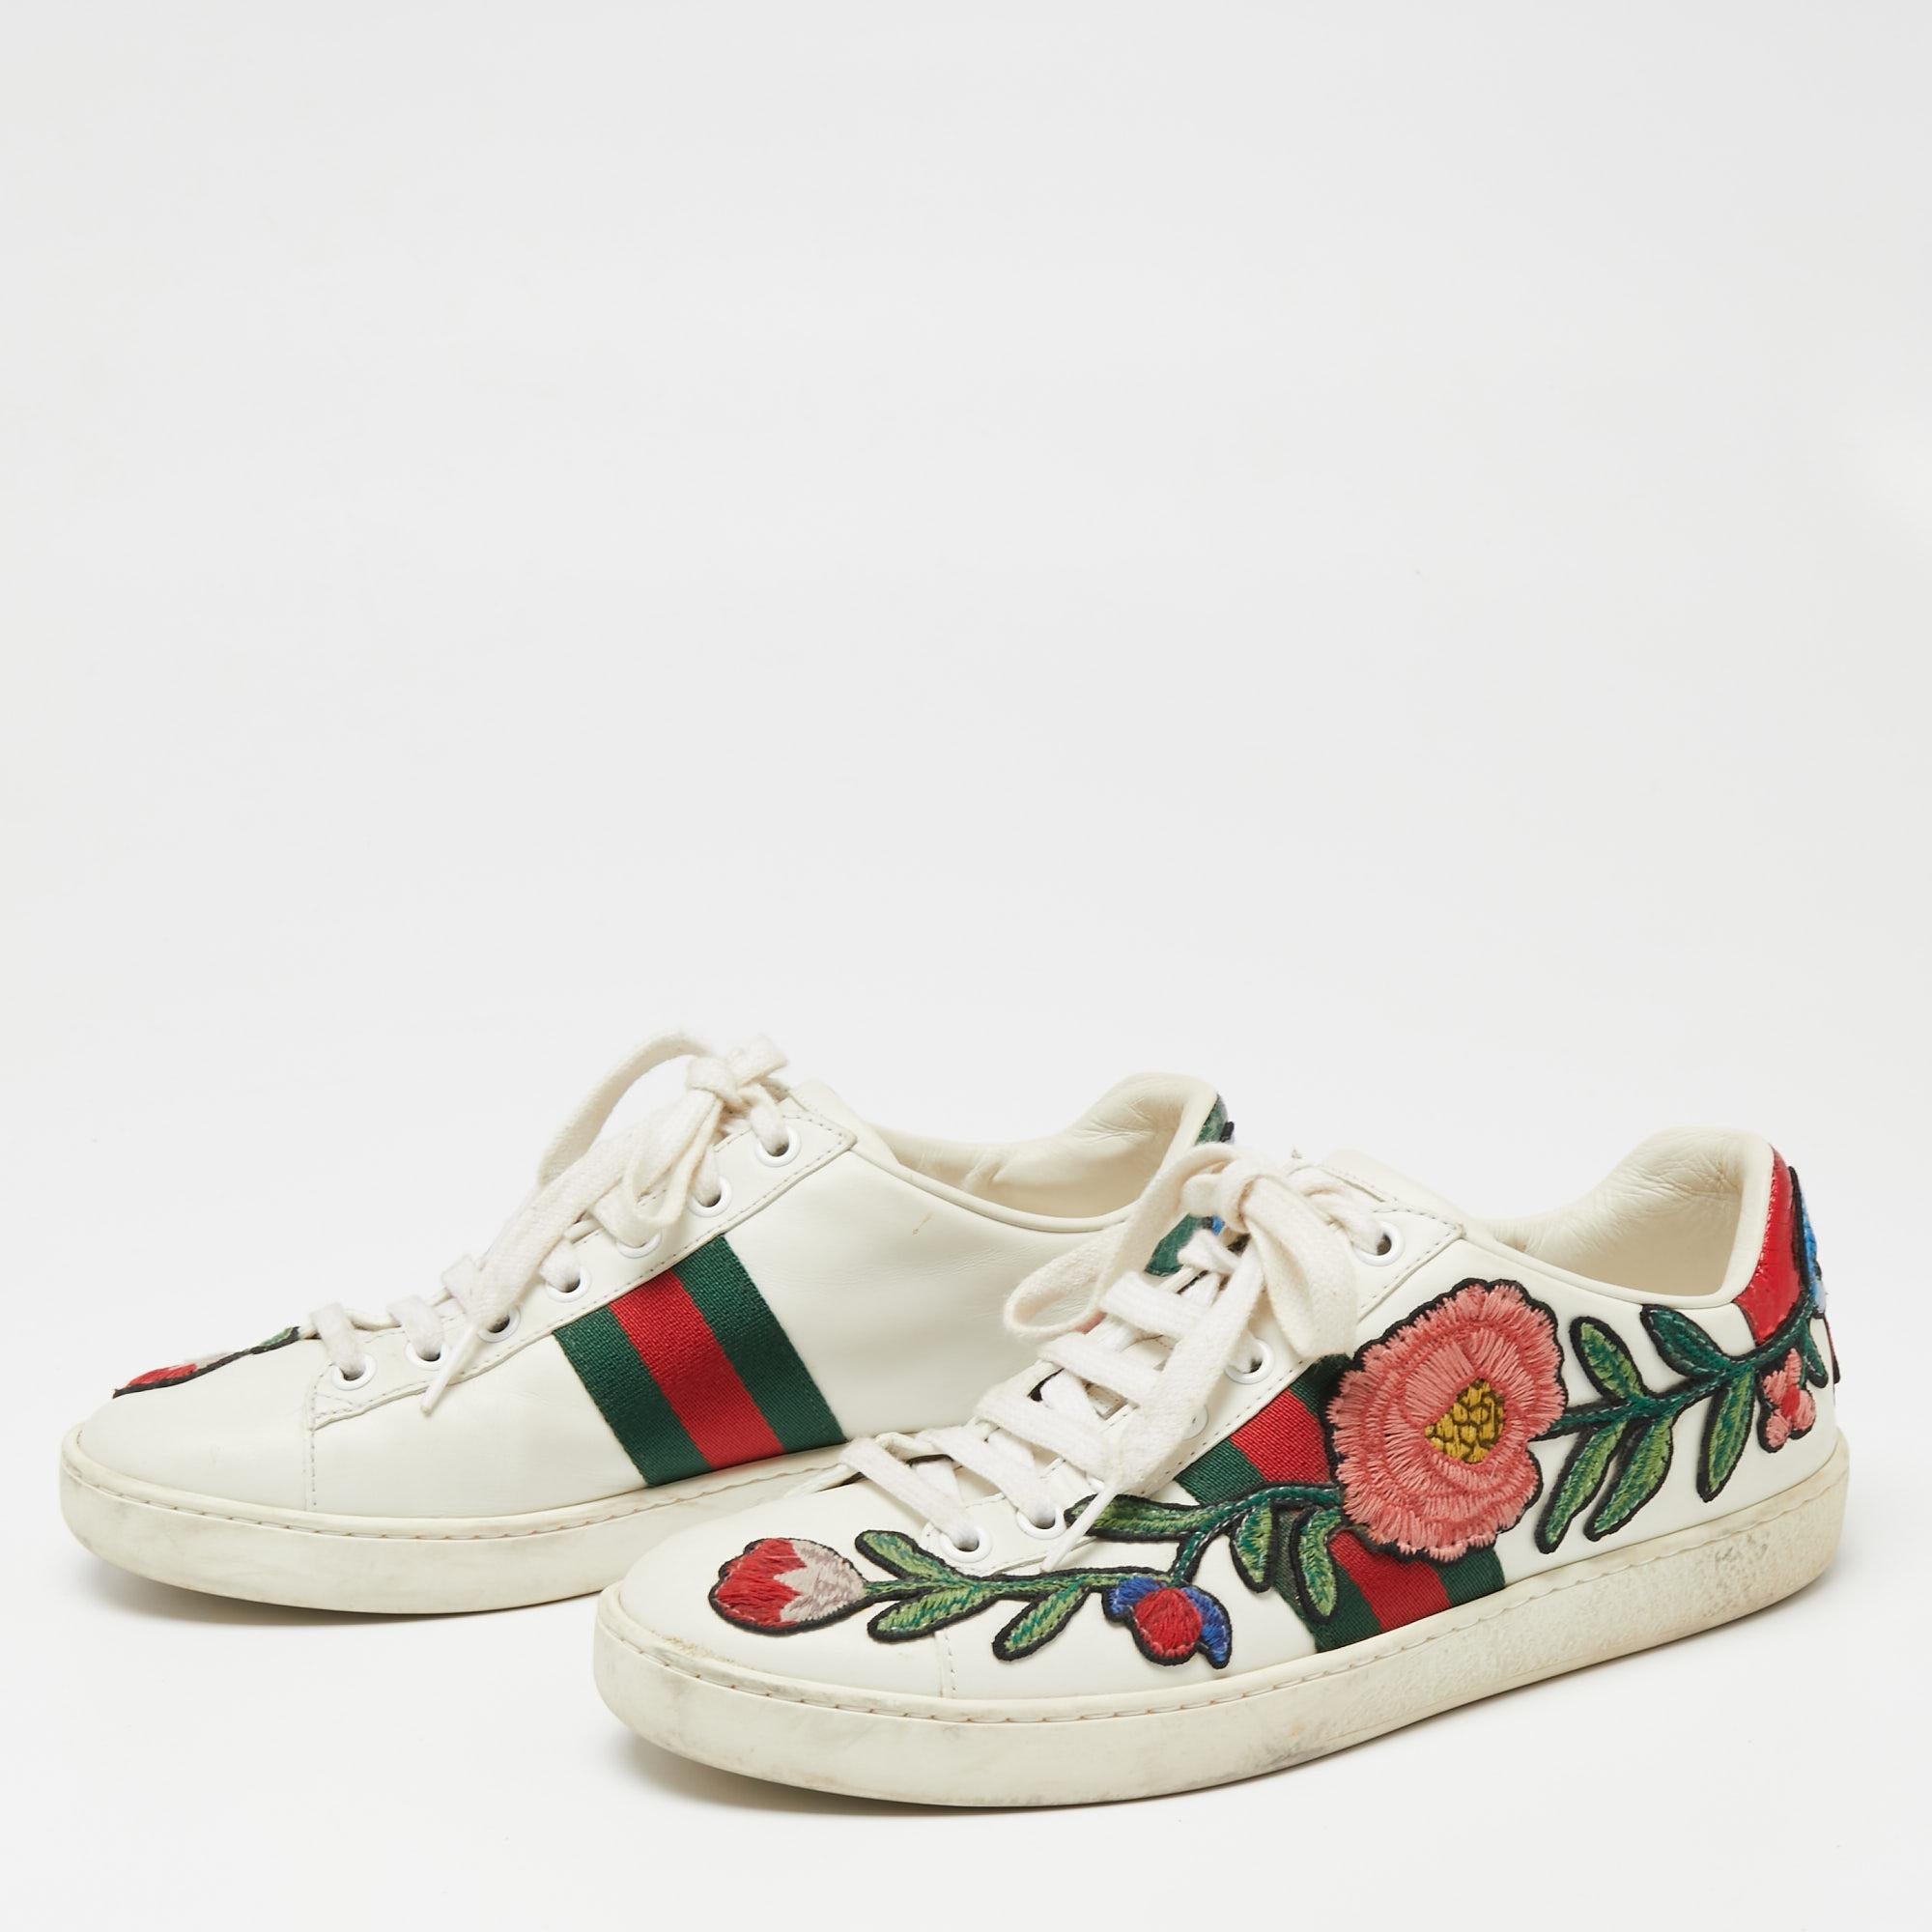 How one's heart flutters at the sight of these Gucci sneakers! Beautifully crafted from leather, they carry the signature web stripe and floral embroidery on the sides. Sneakers are definitely the rage at the moment but these Gucci ones are just a